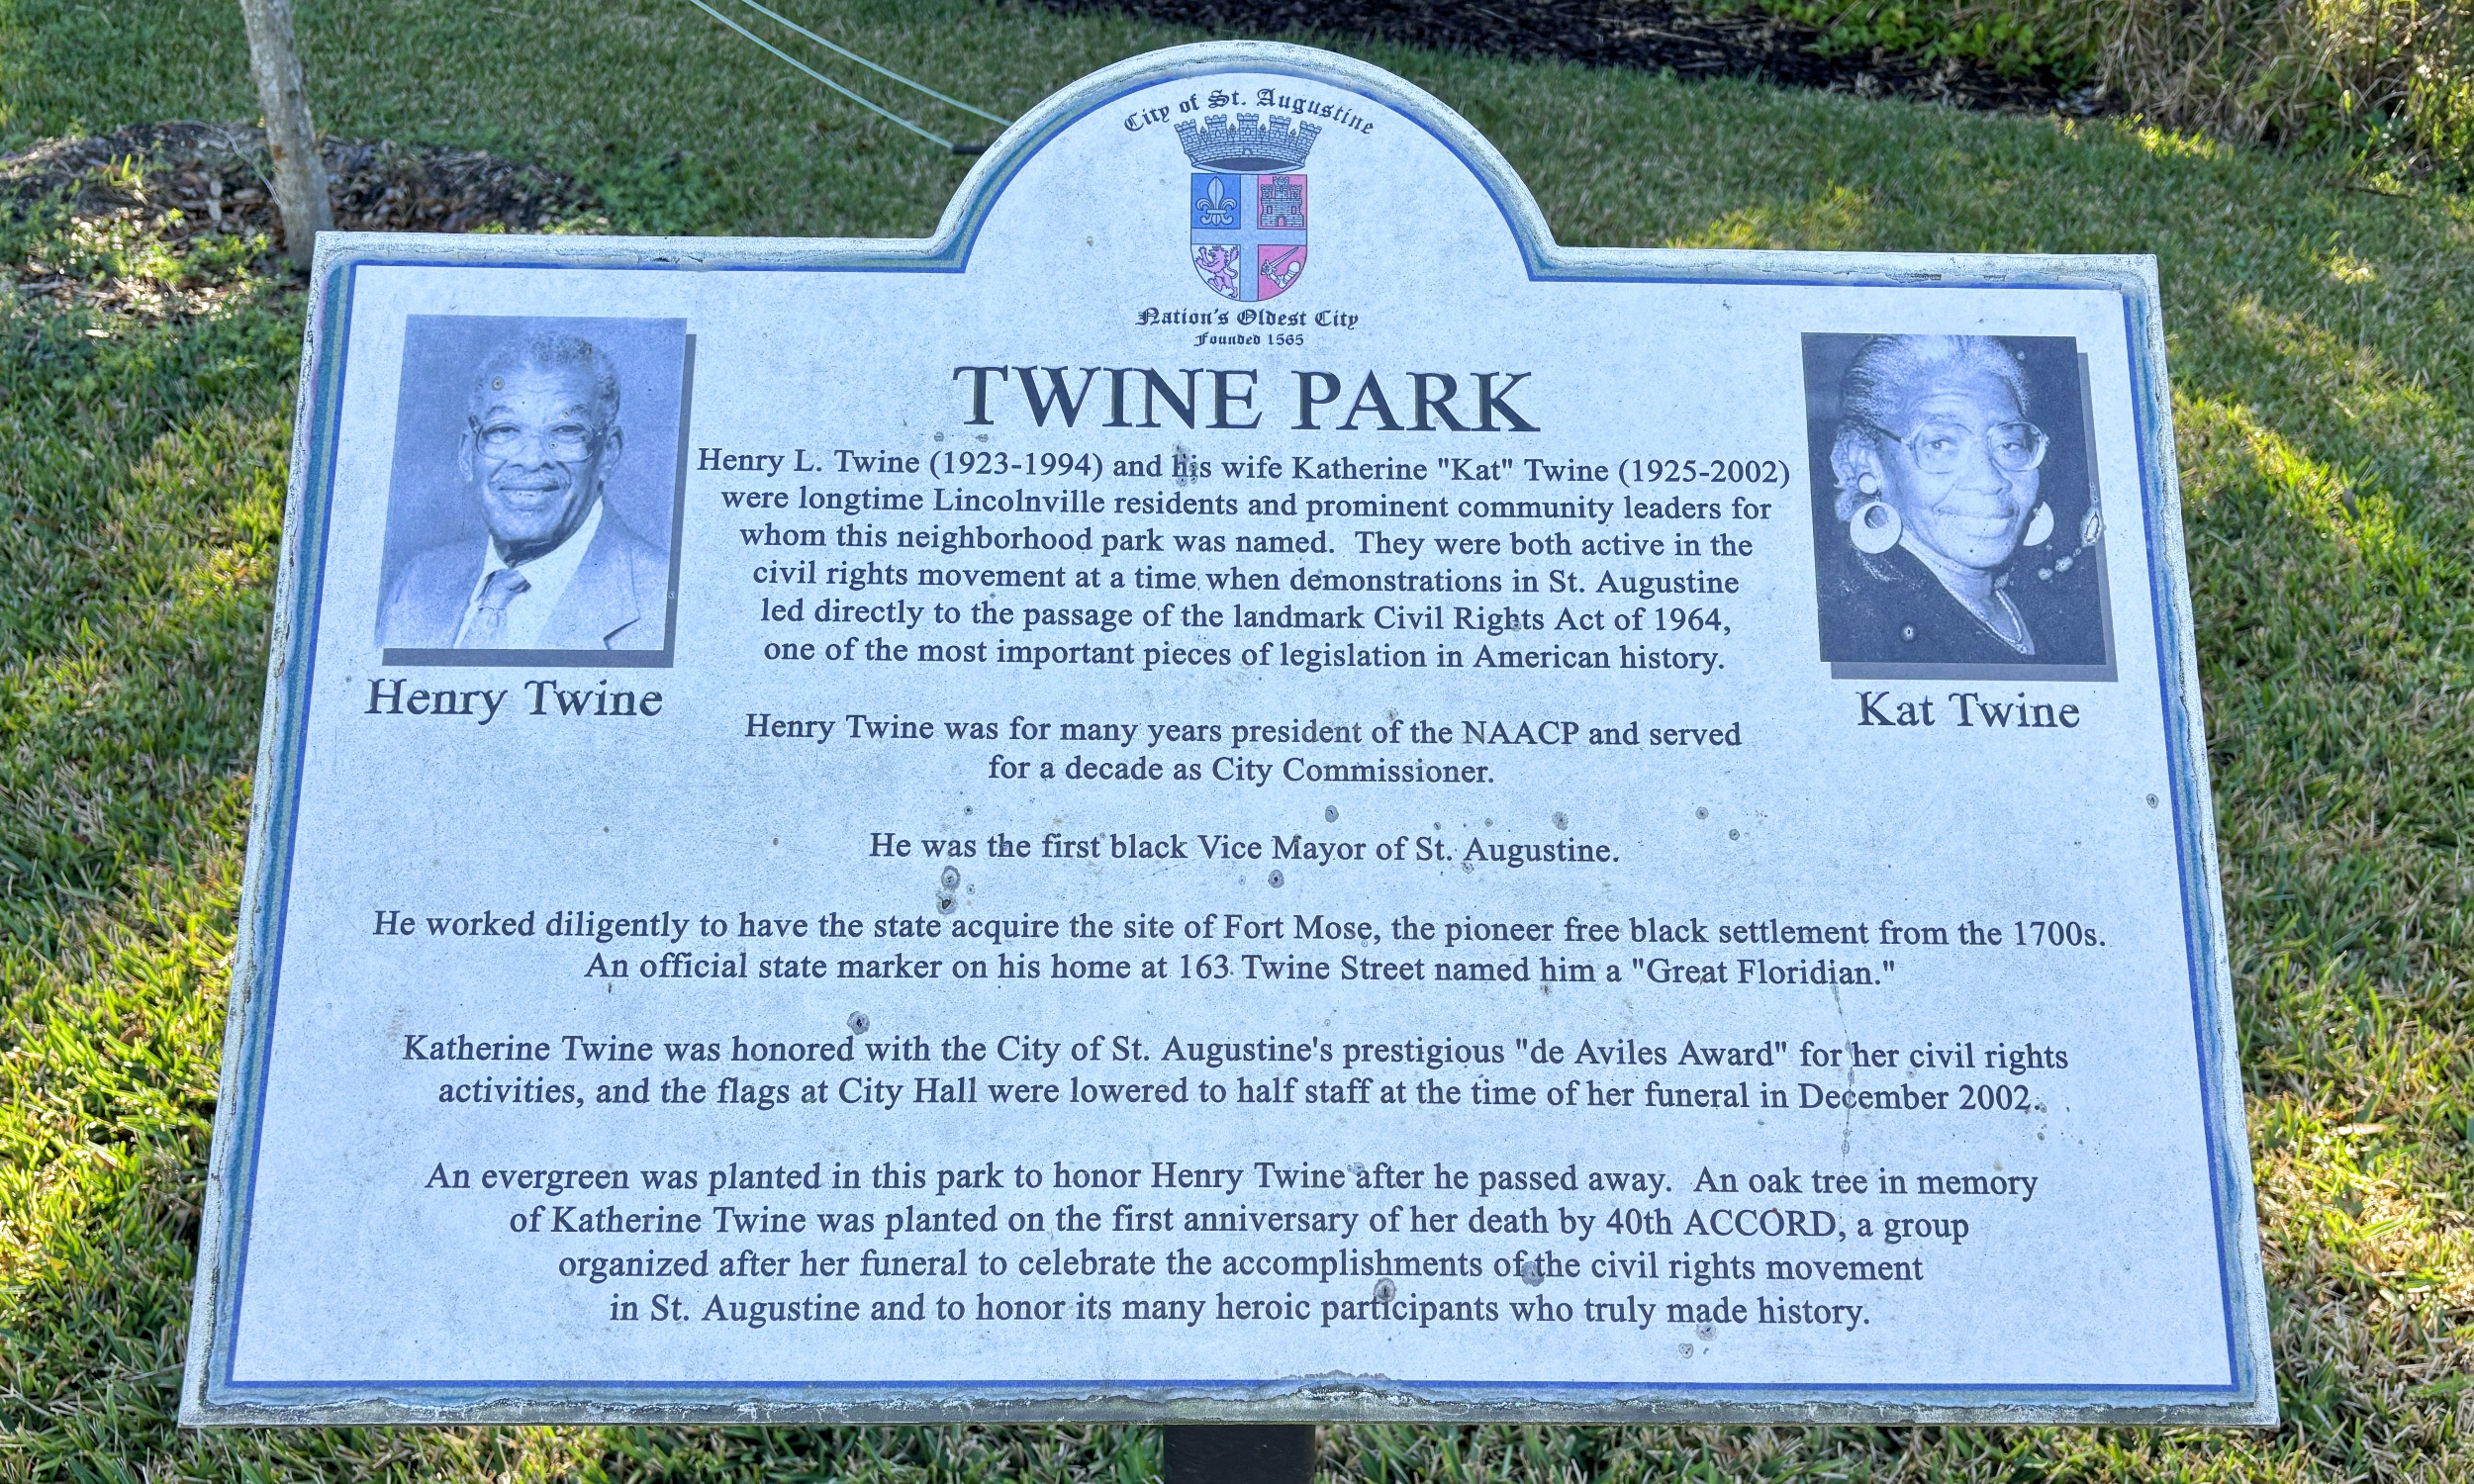 A historical marker installed by the City of St. Augustine at Twine Park. Full marker text in Twine Park profile.